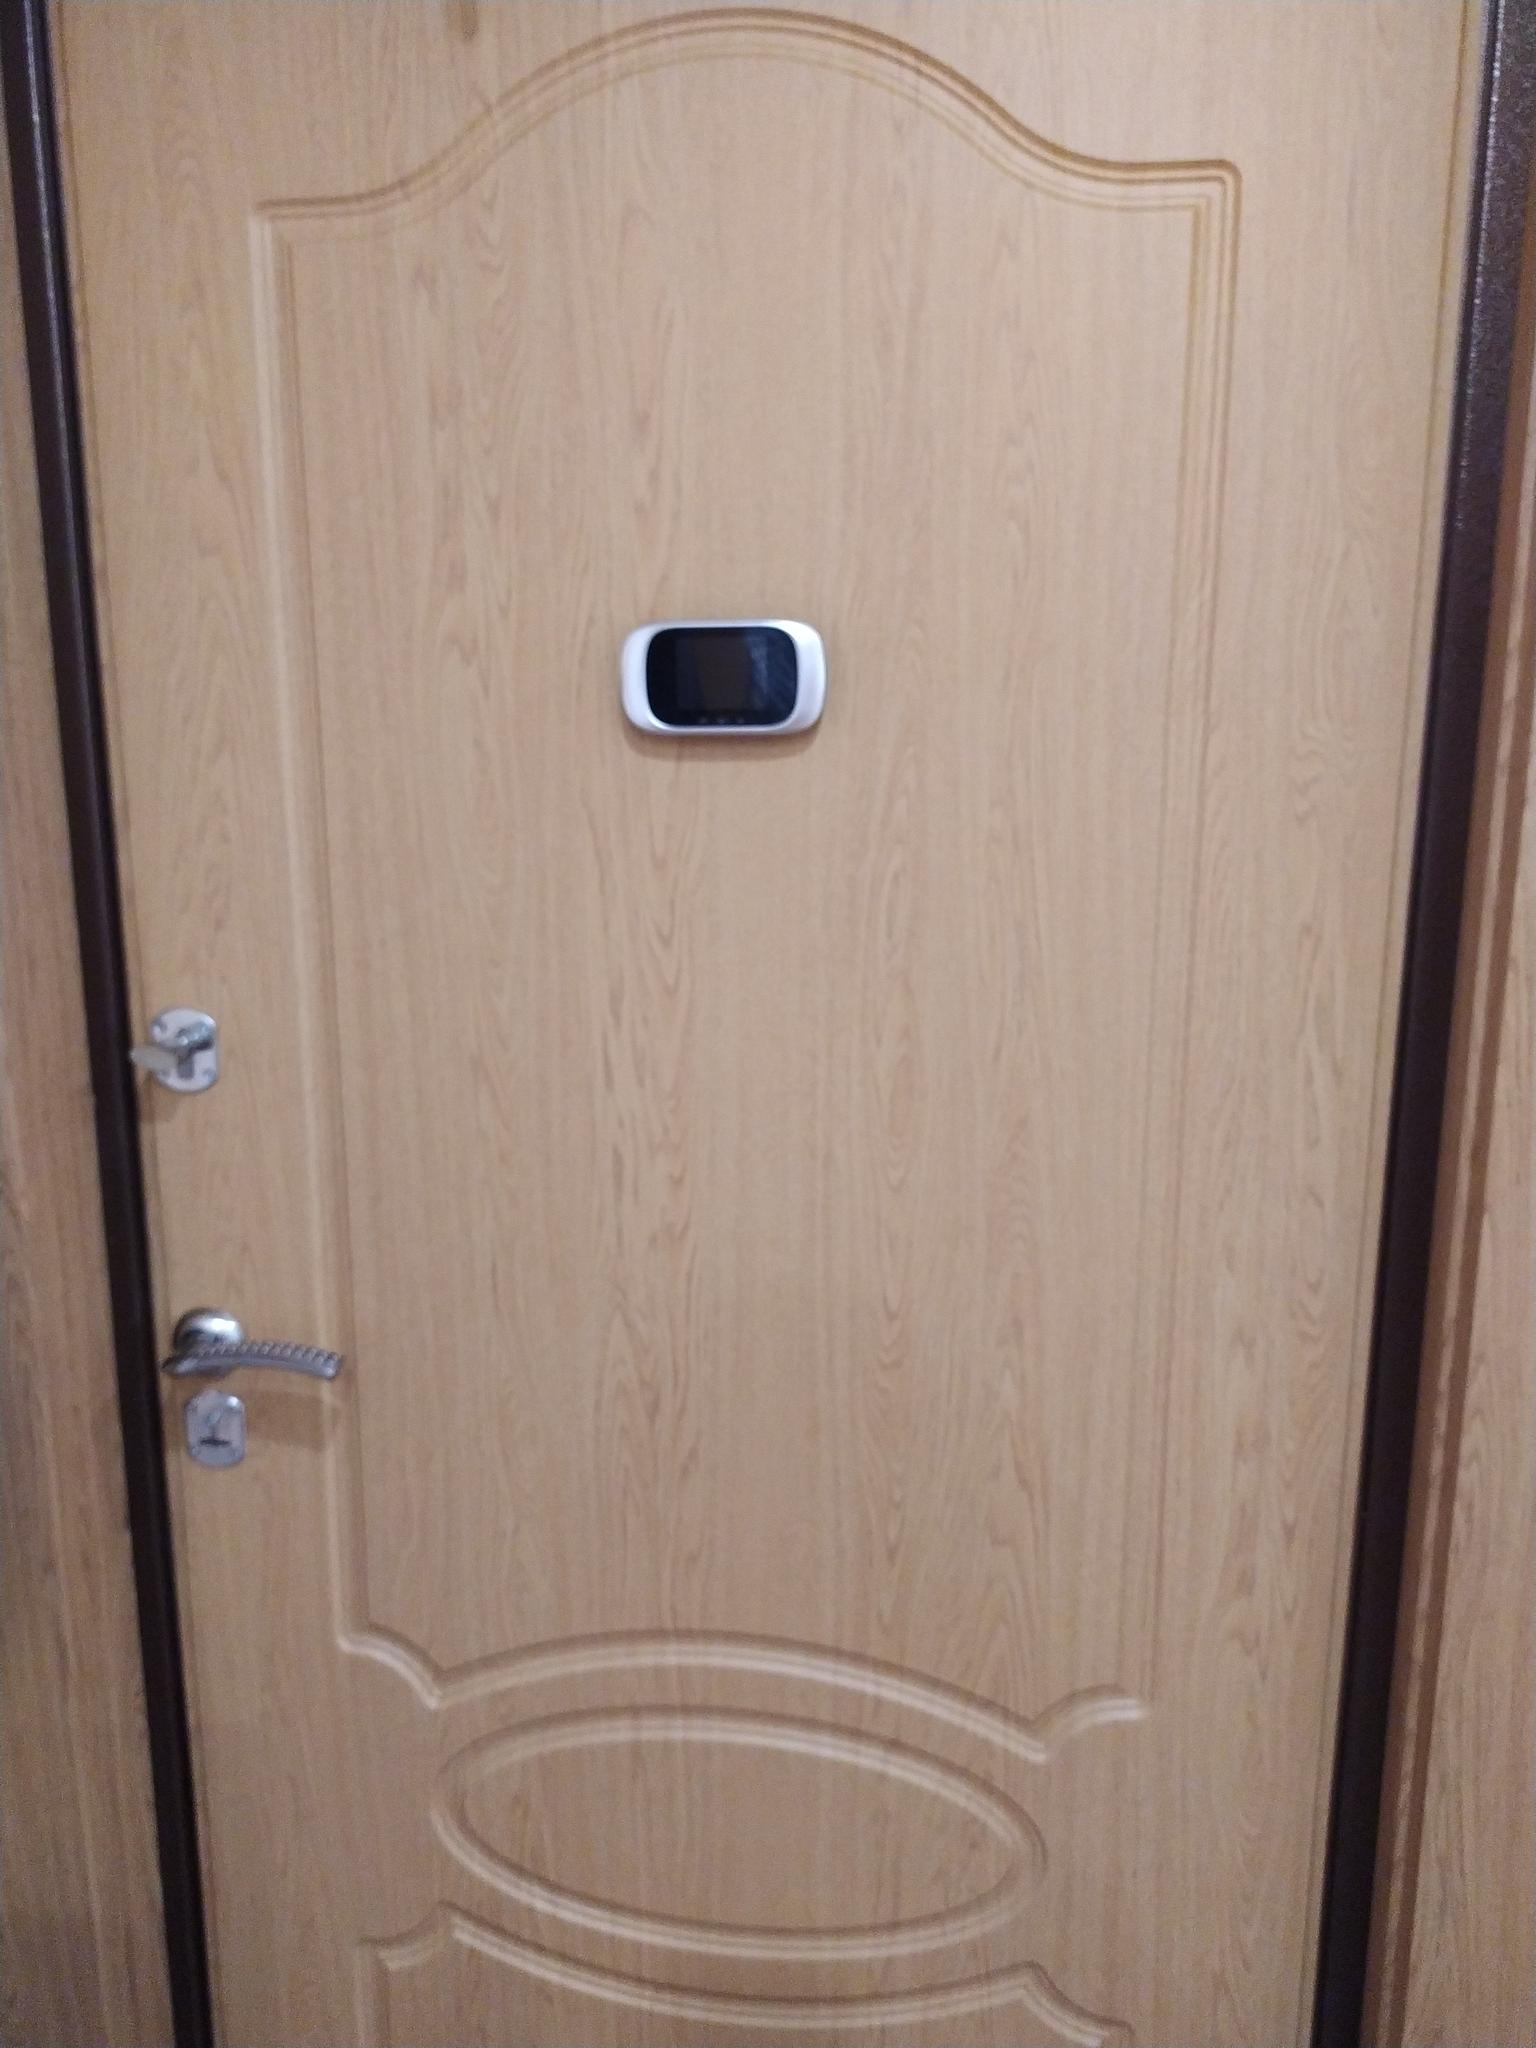 Doorbell Peephole Camera Great Product And Highly Recommended photo review